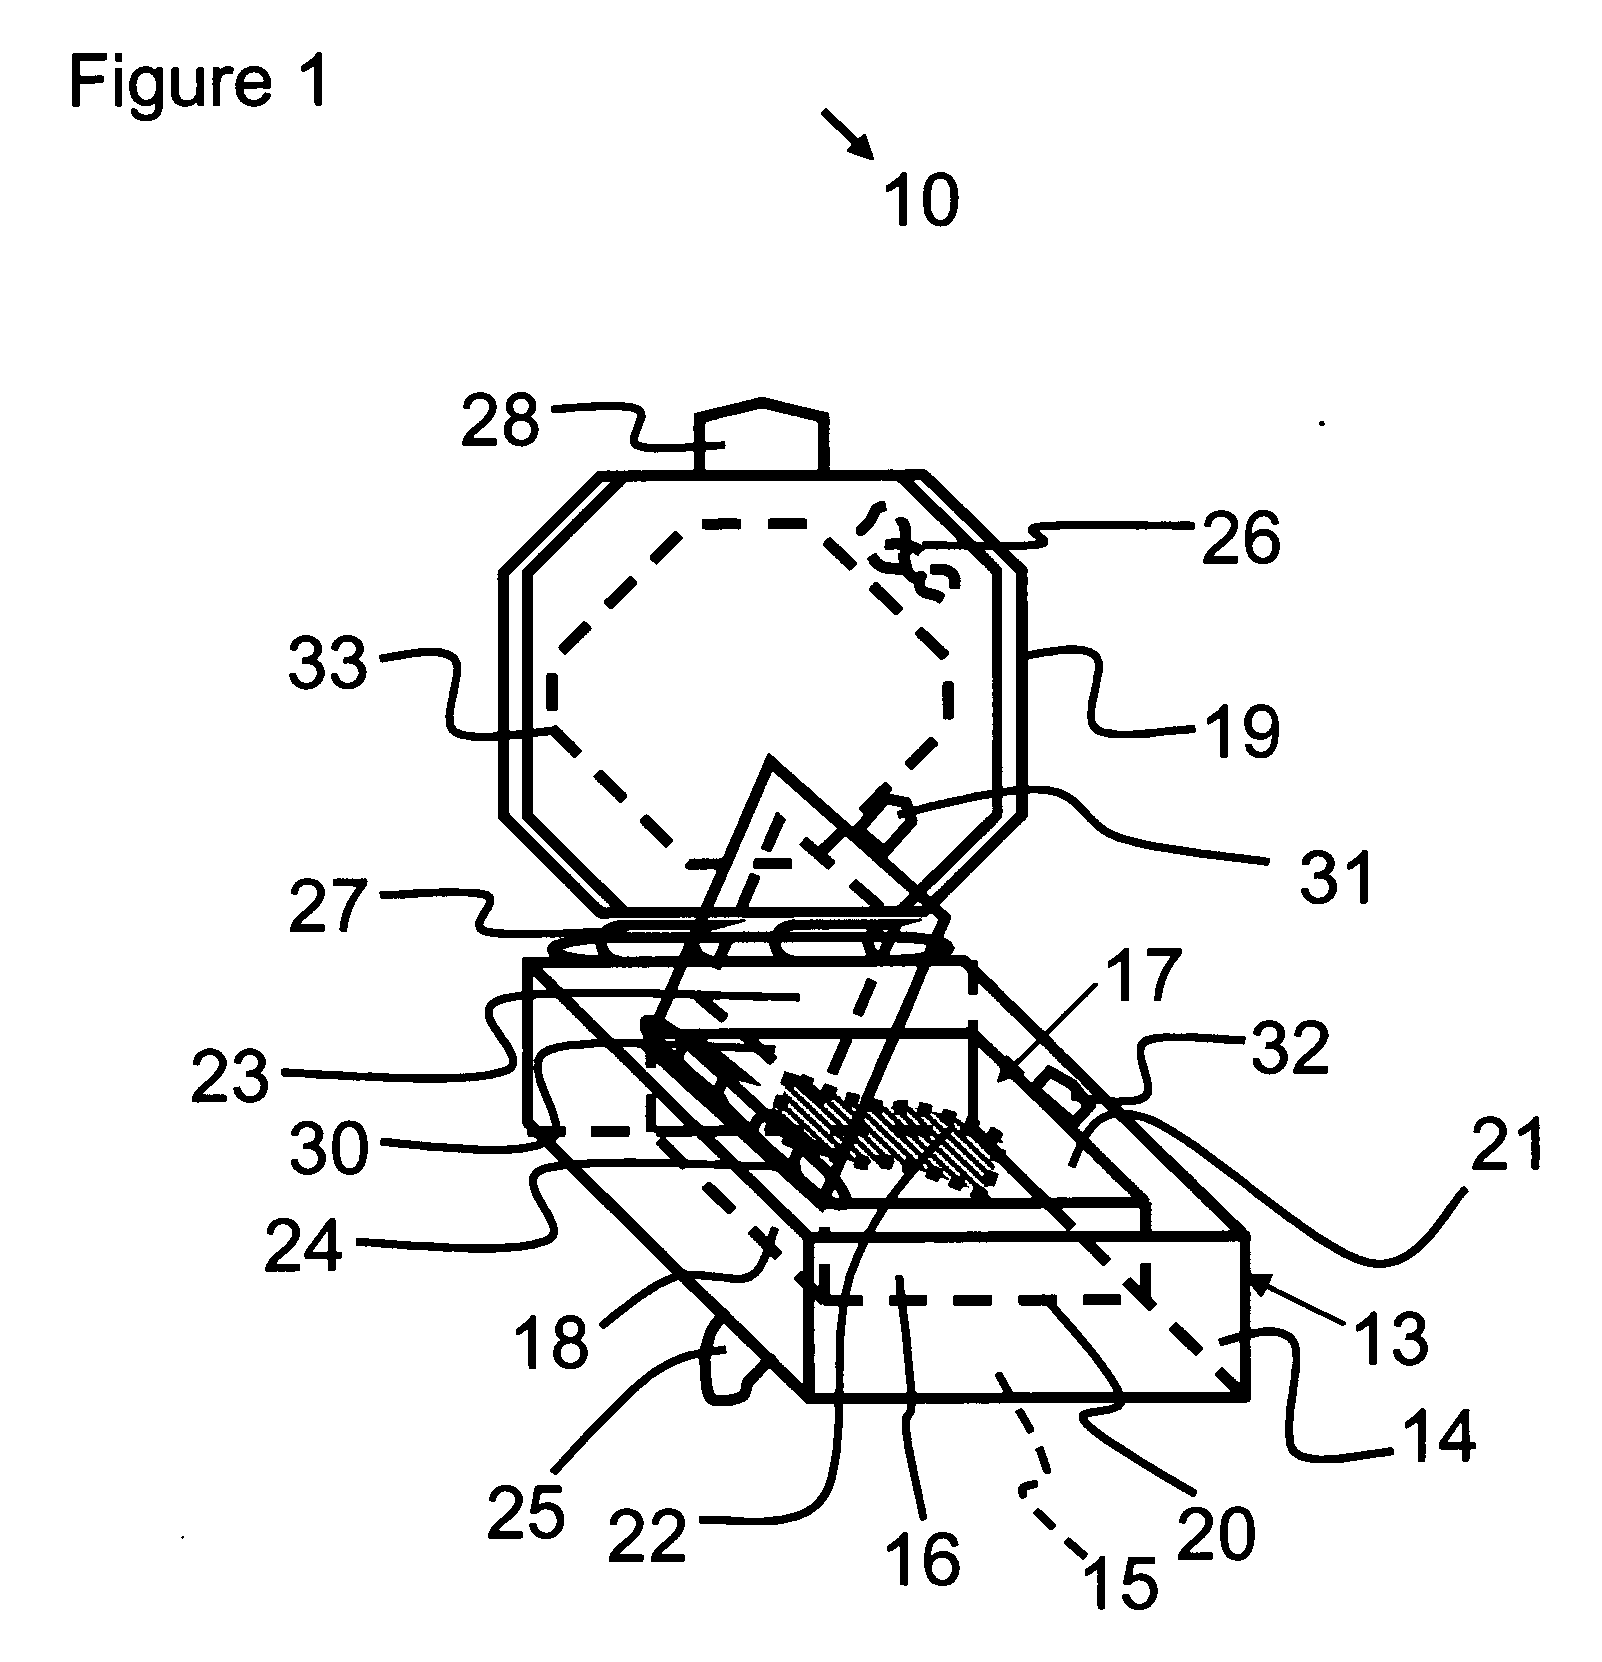 Keepsake storage jewelry apparatus and method for manufacturing the same